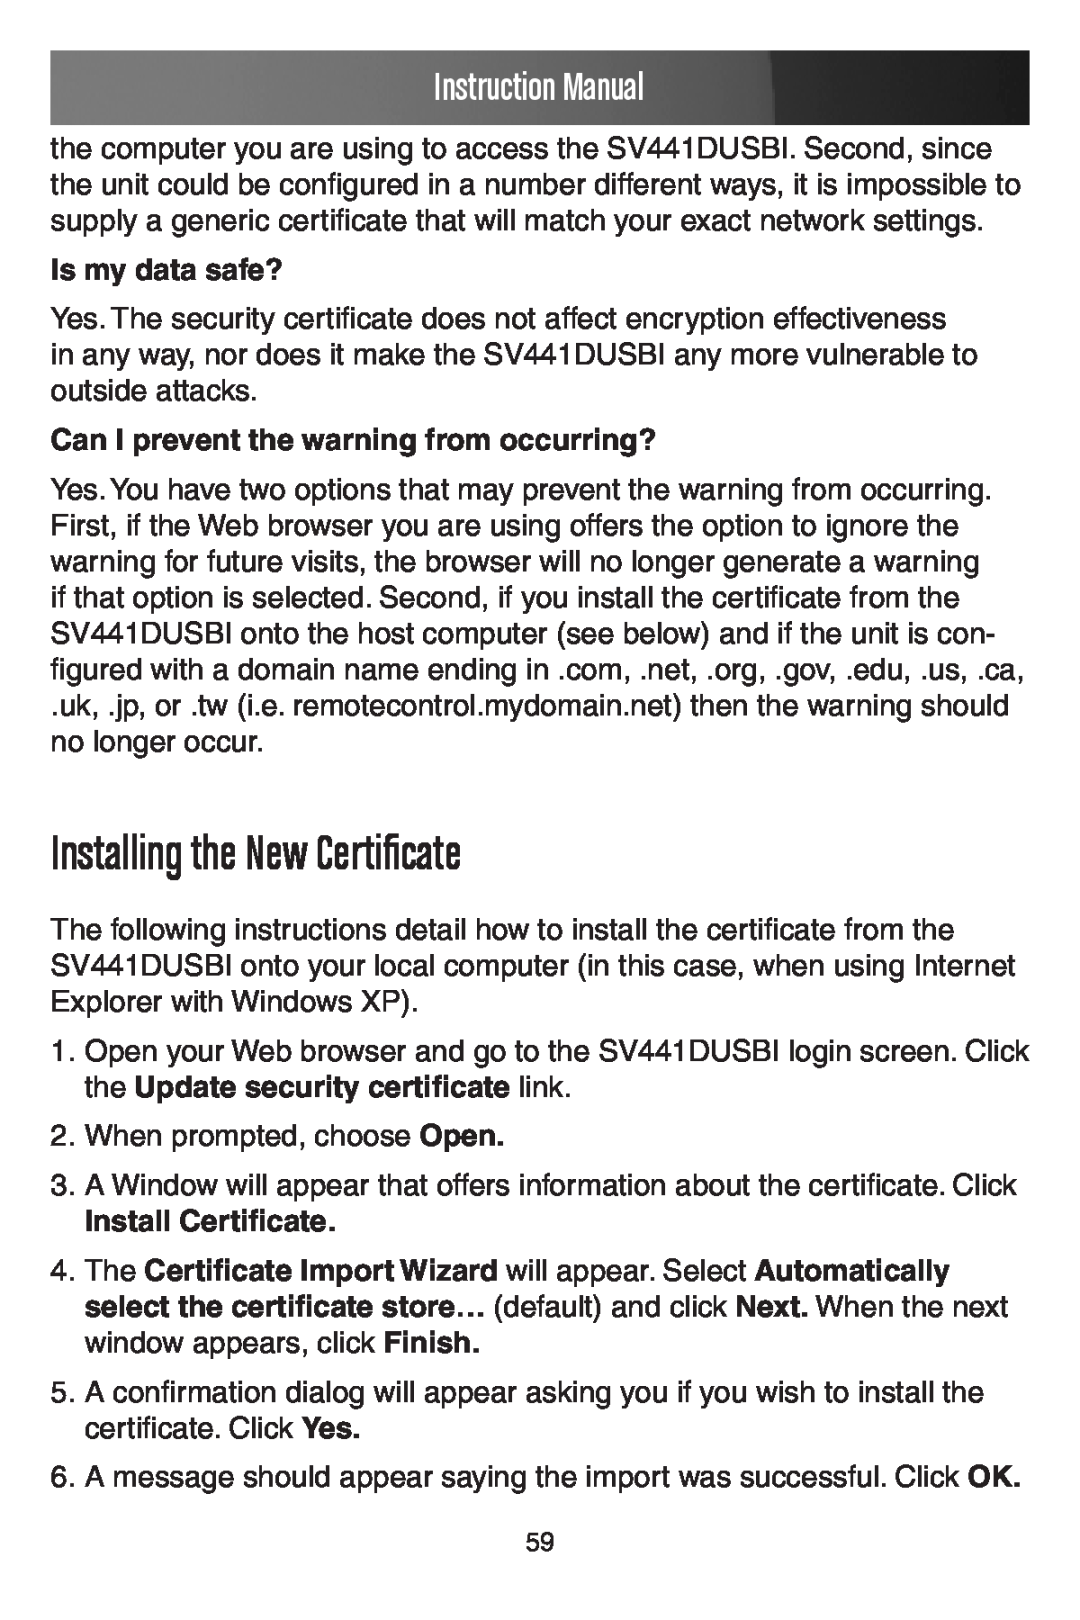 StarTech.com SV441DUSBI Installing the New Certificate, Is my data safe?, Can I prevent the warning from occurring? 